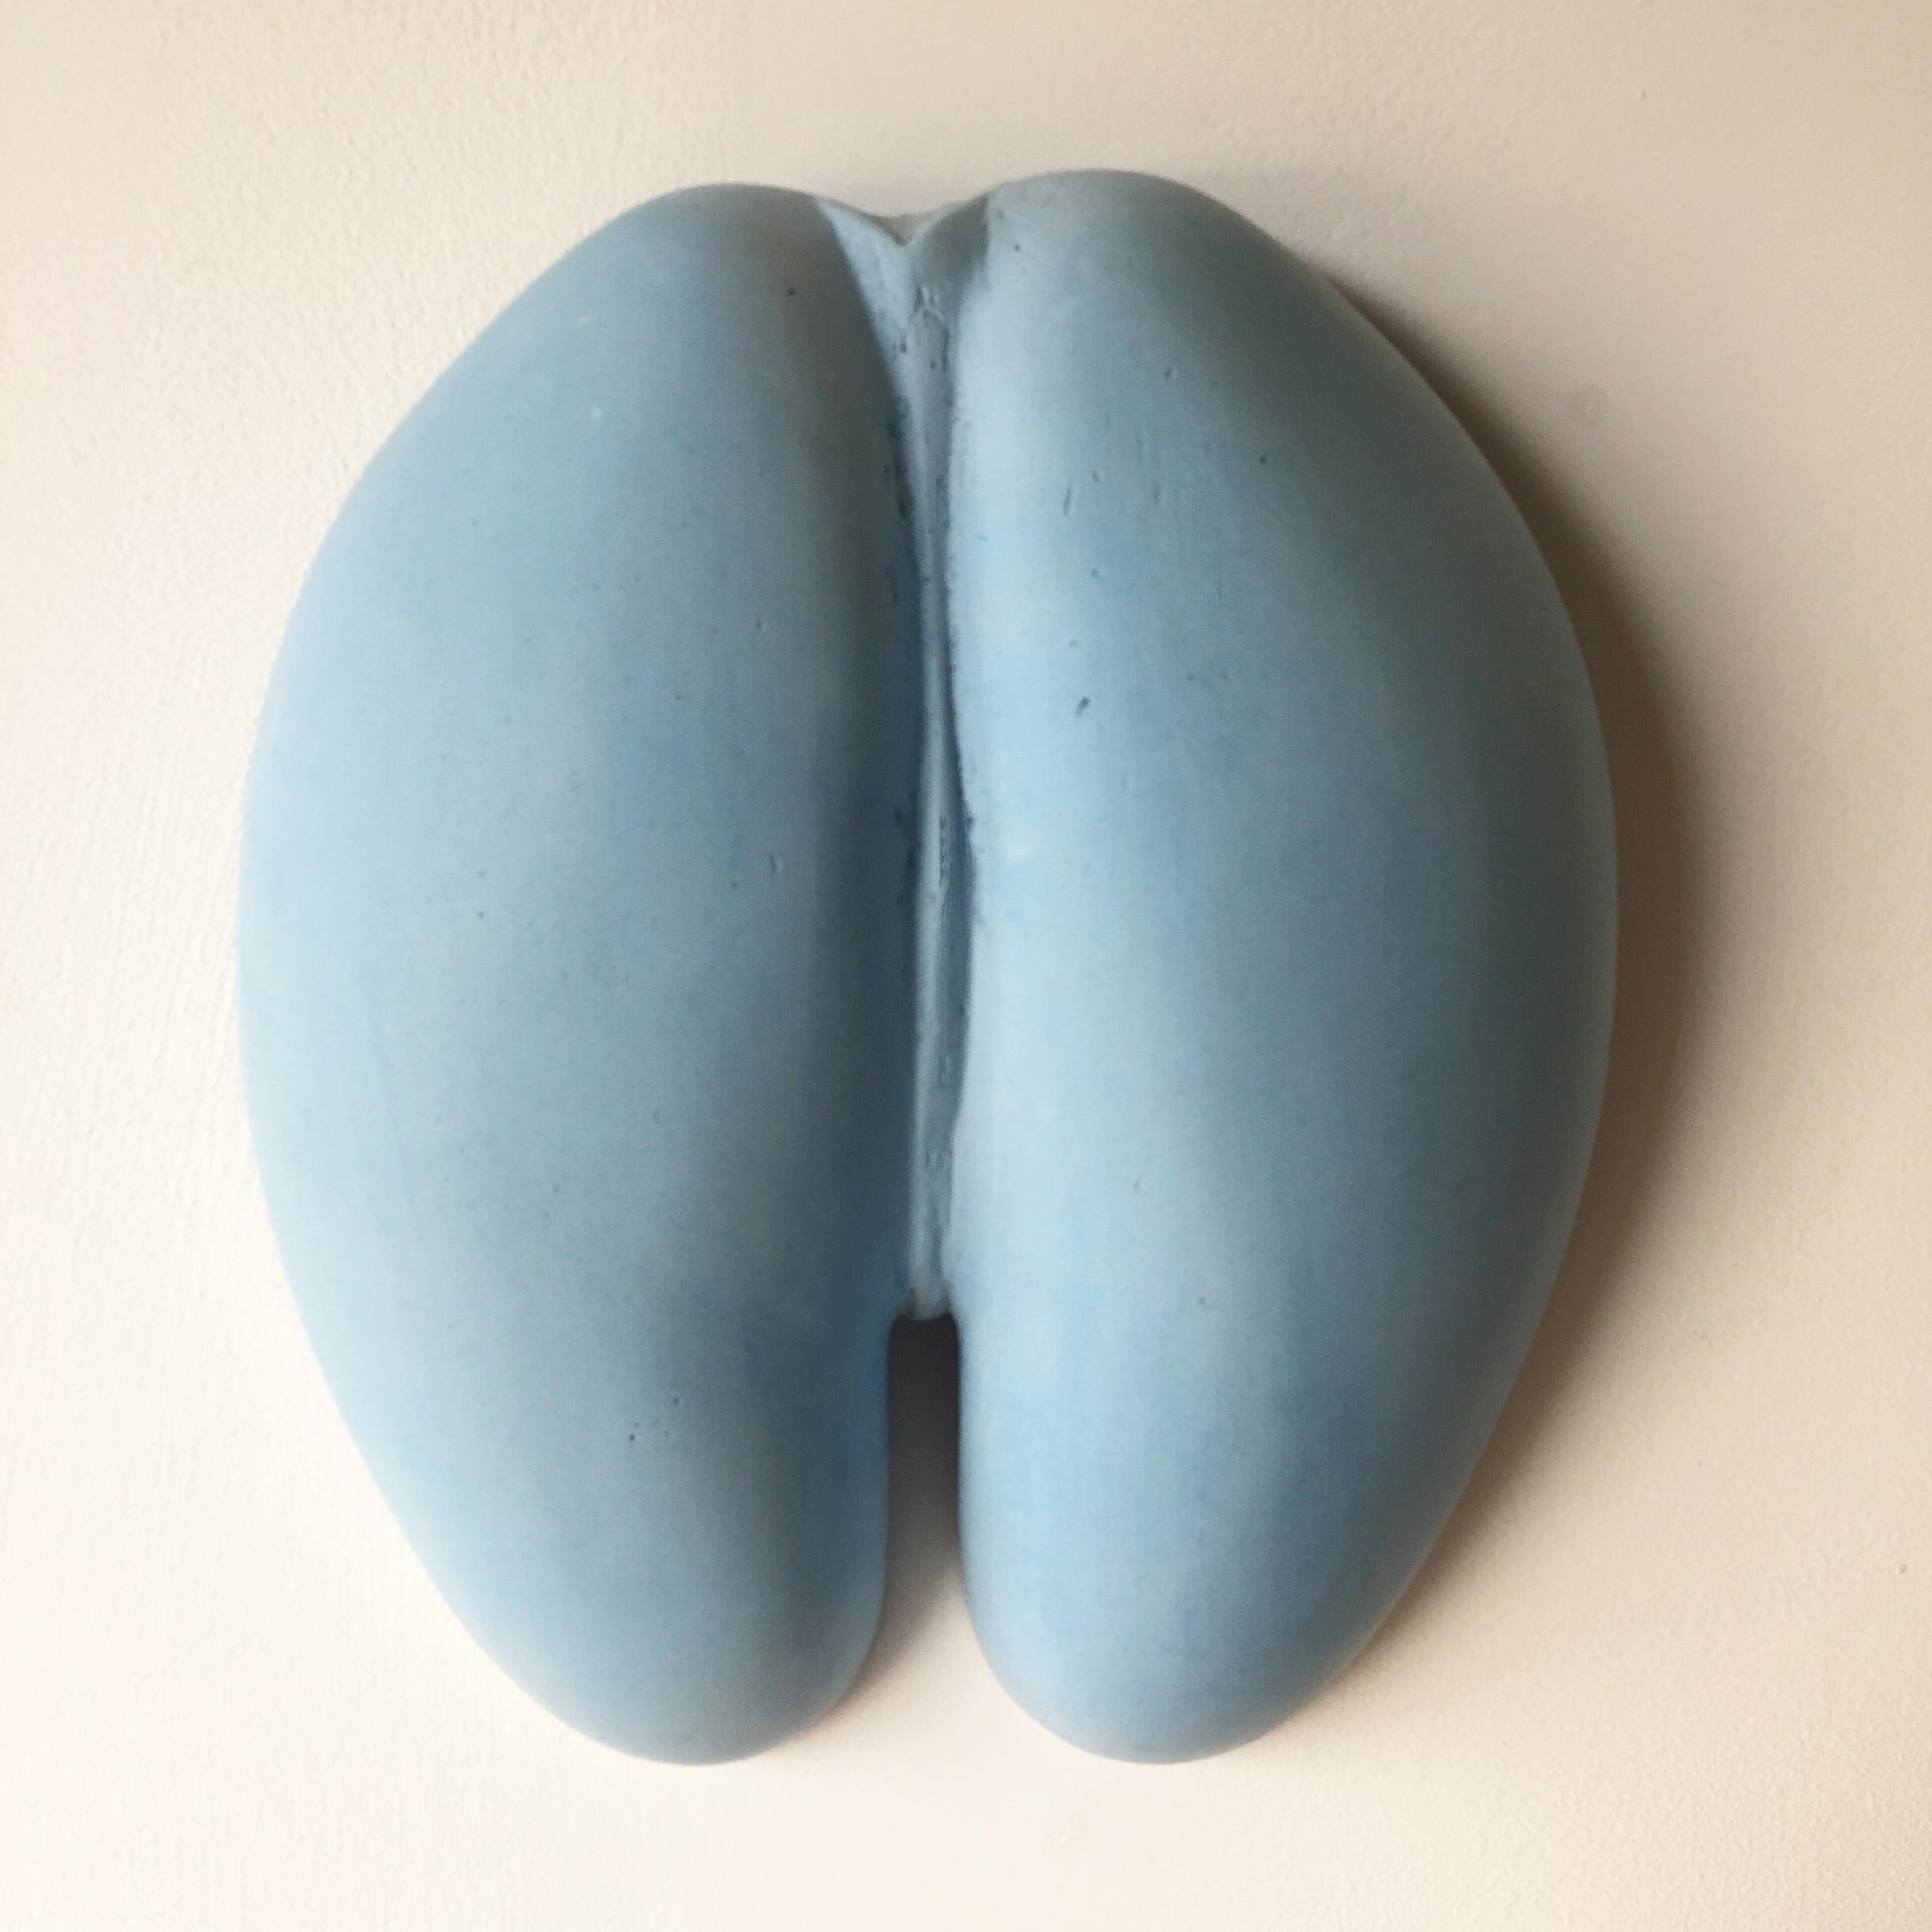 A quirky variation on a classic from the cabinet of curiosities.

Each example is handmade using tinted plaster formed from a silicone mould. The mould itself was taken from a near perfectly symmetrical natural example.

These three-dimensional